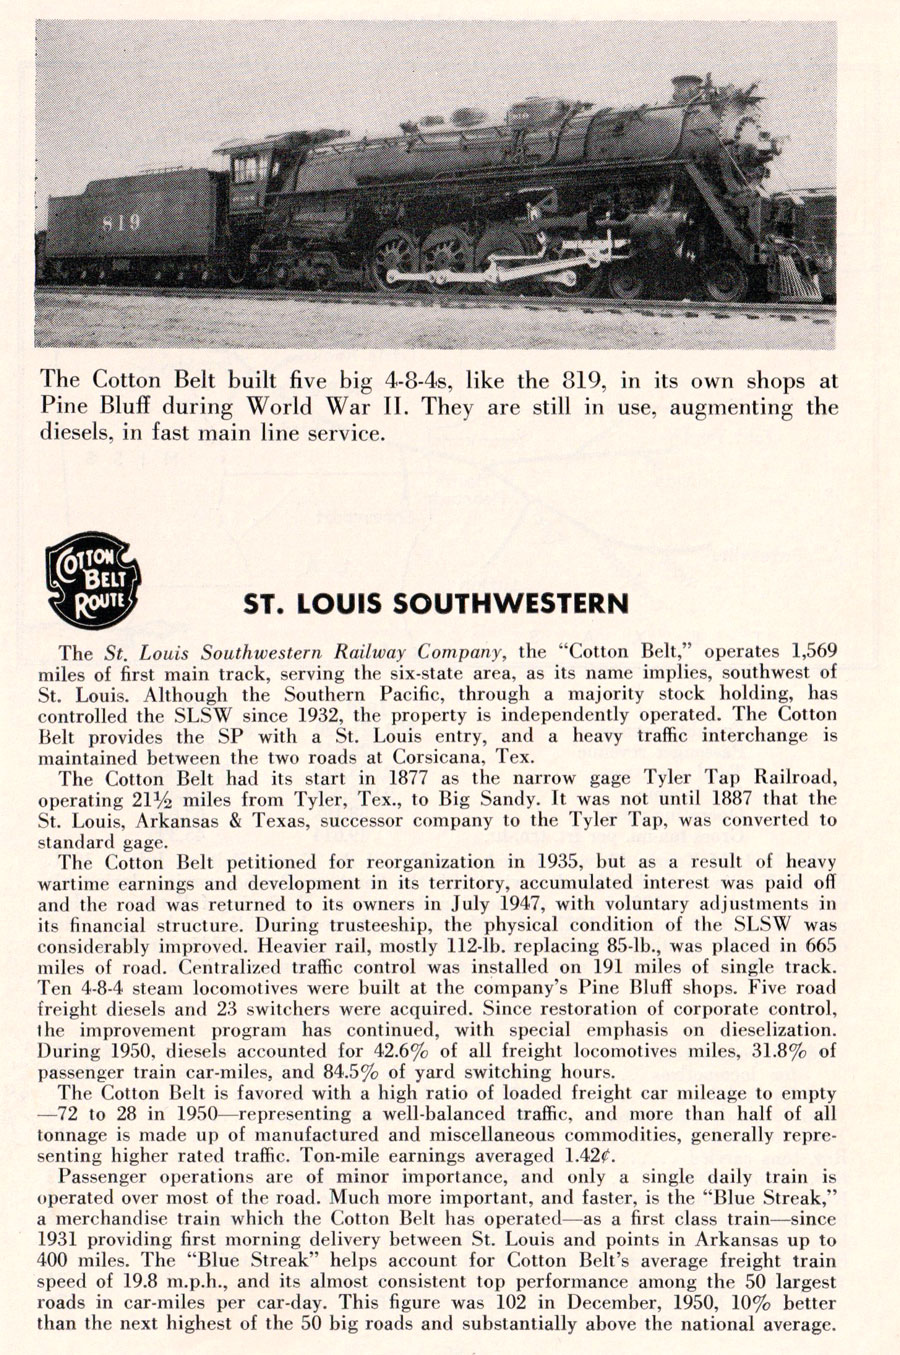 ssw_guide1951a